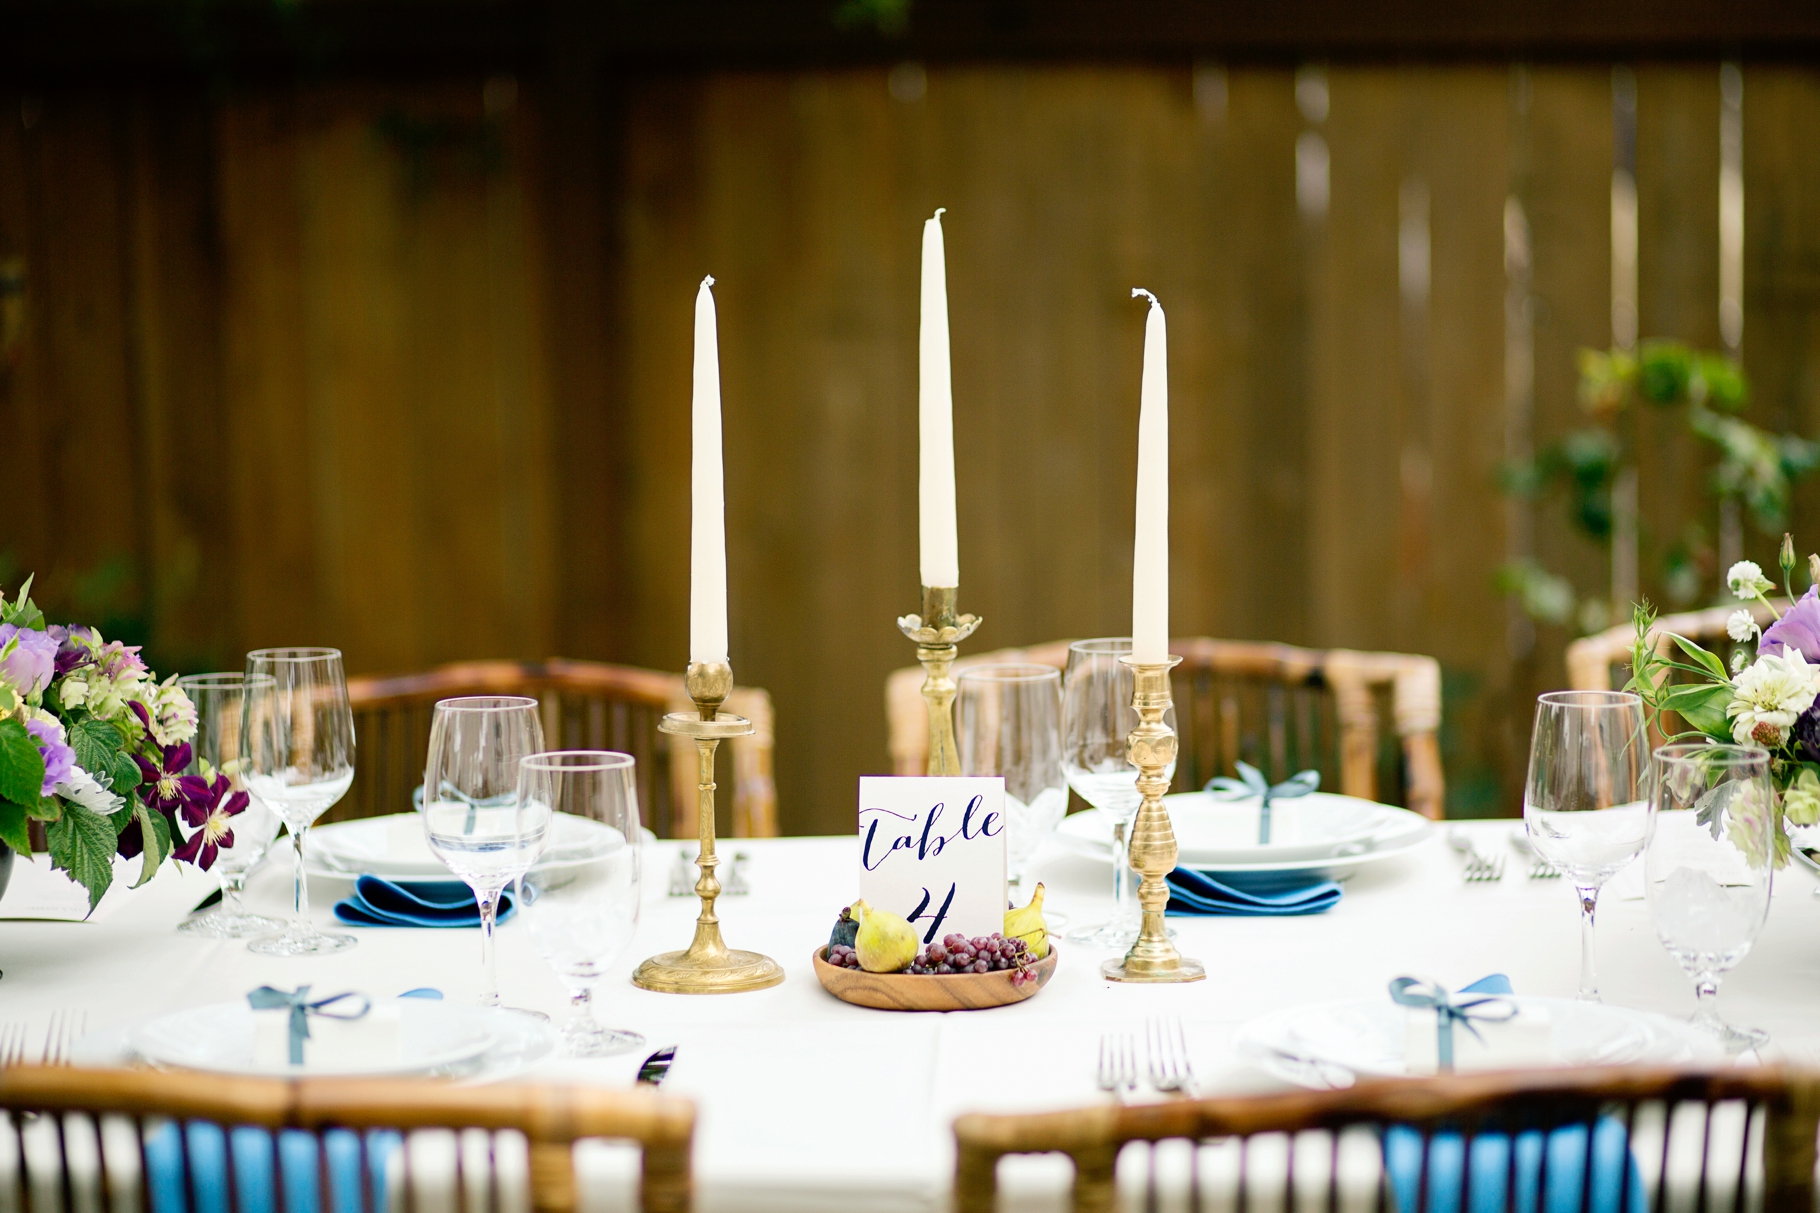 10-Wedding-Celebration-Ballard-Reception-Bride-Groom-Backyard-Garden-Dinner-Figs-Grapes-Calligraphy-Table-Numbers-Centerpieces-Photography-by-Betty-Elaine